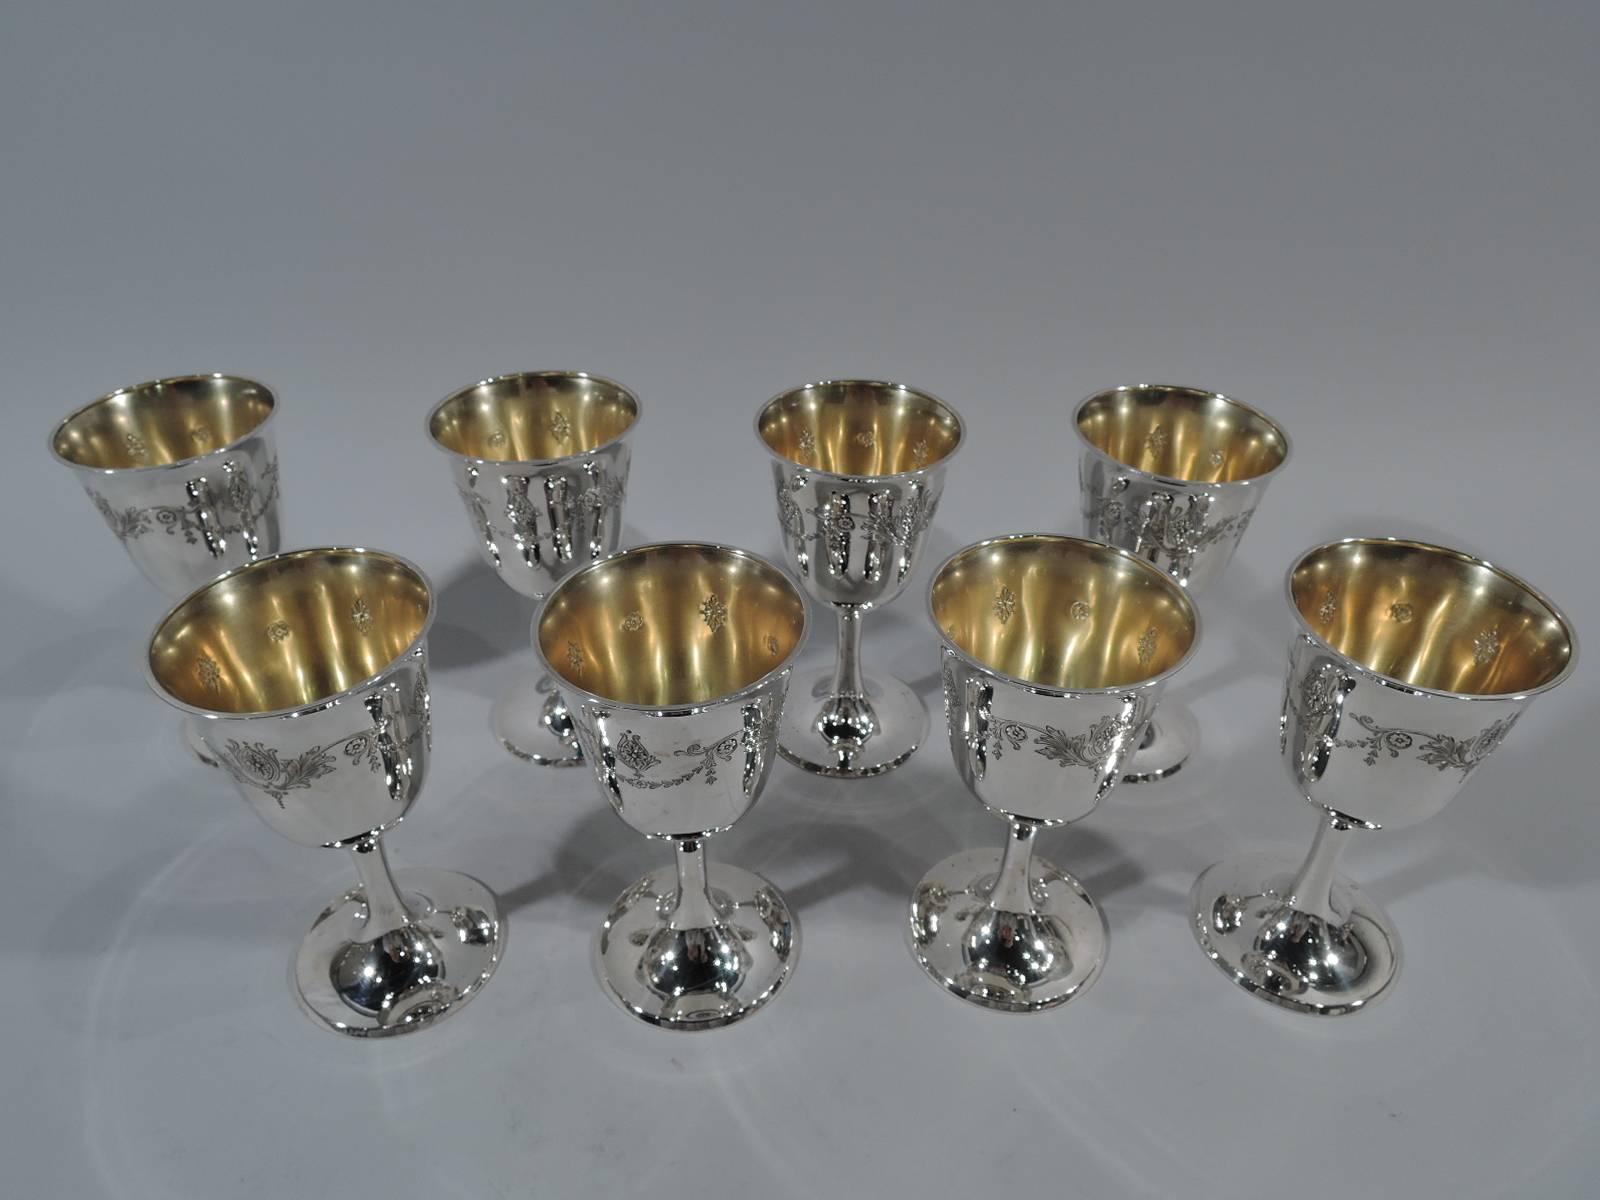 Set of eight Edwardian sterling silver goblets. Made by Whiting in New York in 1916. Each: Bell bowl with flared rim, slender stem, and raised foot. Body has chased and repousse garland with paterae, leaves, and flowers. Interior has gilt wash.